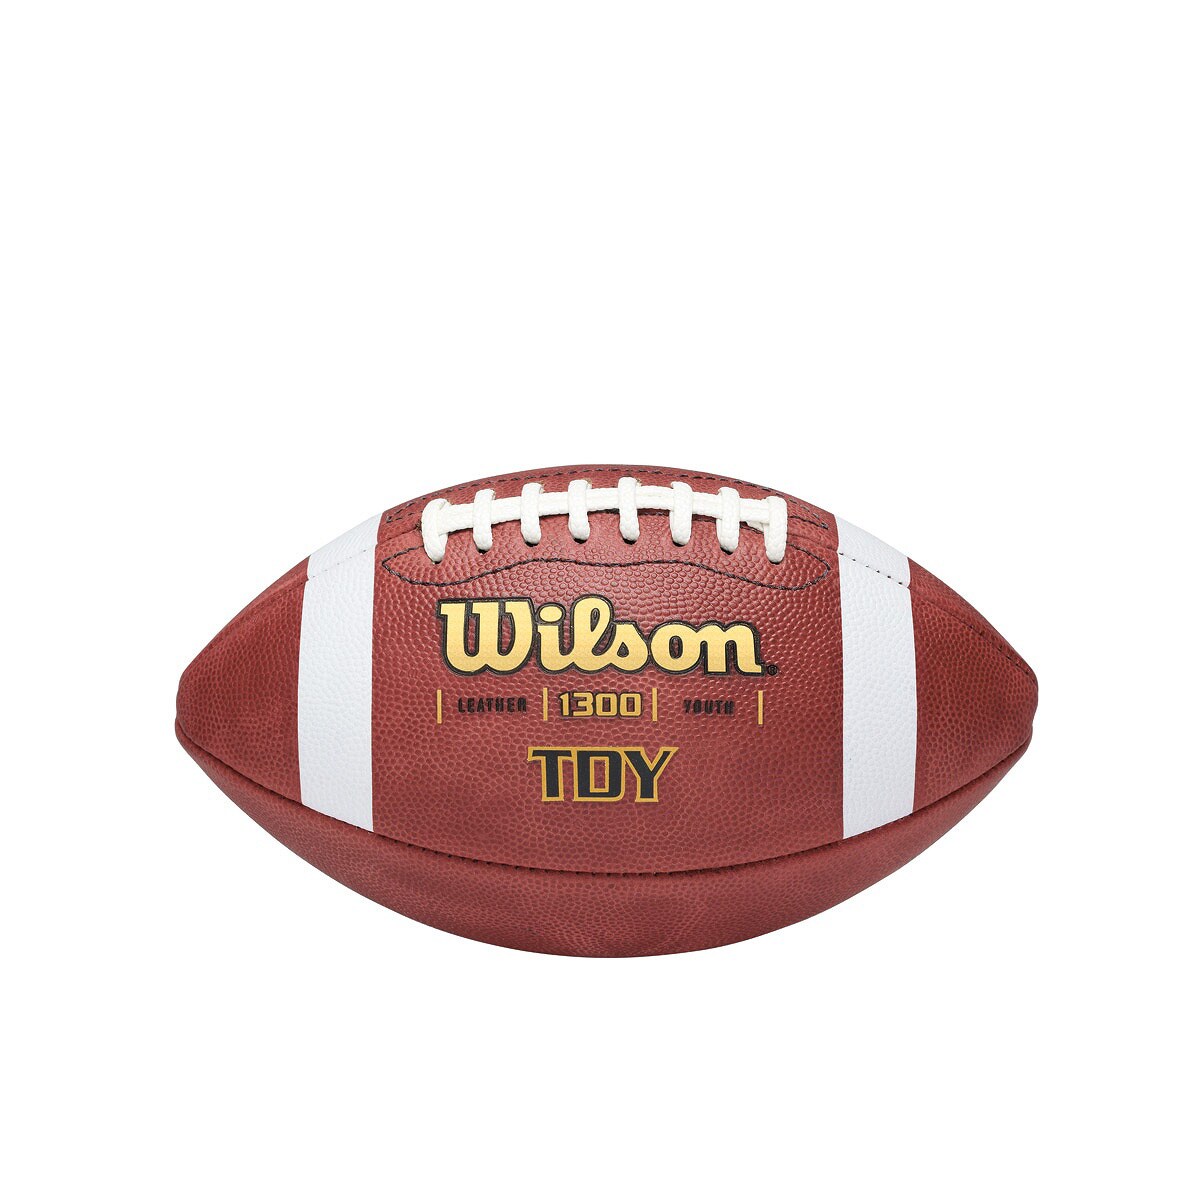 Wilson TDY Youth Leather Football With Grip Stripes - image 2 of 2